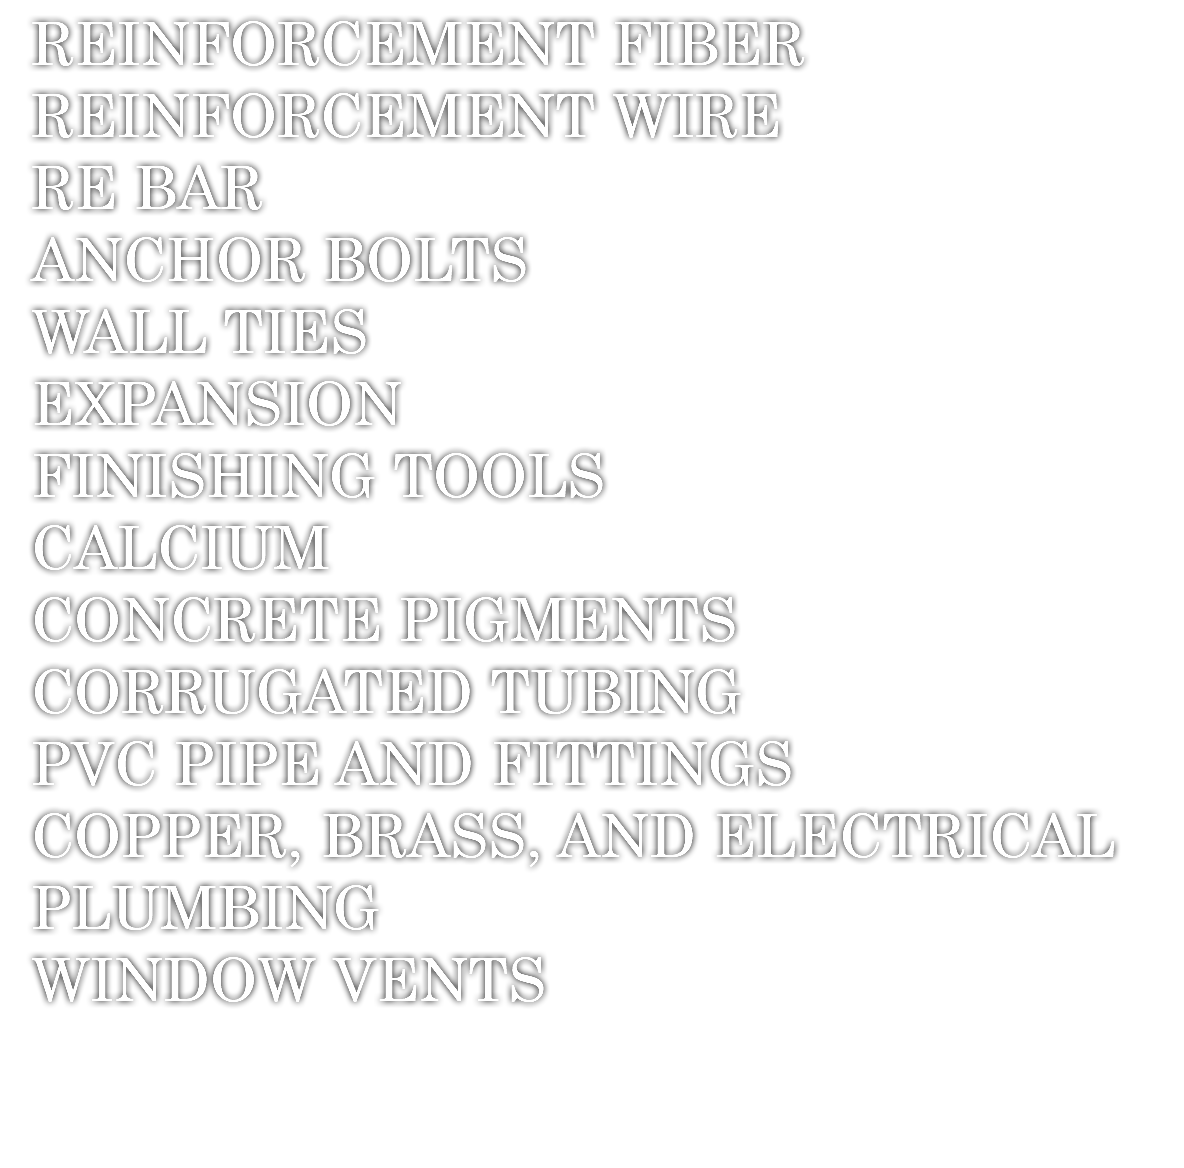 REINFORCEMENT FIBER REINFORCEMENT WIRE RE BAR ANCHOR BOLTS WALL TIES EXPANSION FINISHING TOOLS CALCIUM CONCRETE PIGMENTS CORRUGATED TUBING PVC PIPE AND FITTINGS COPPER, BRASS, AND ELECTRICAL PLUMBING WINDOW VENTS 